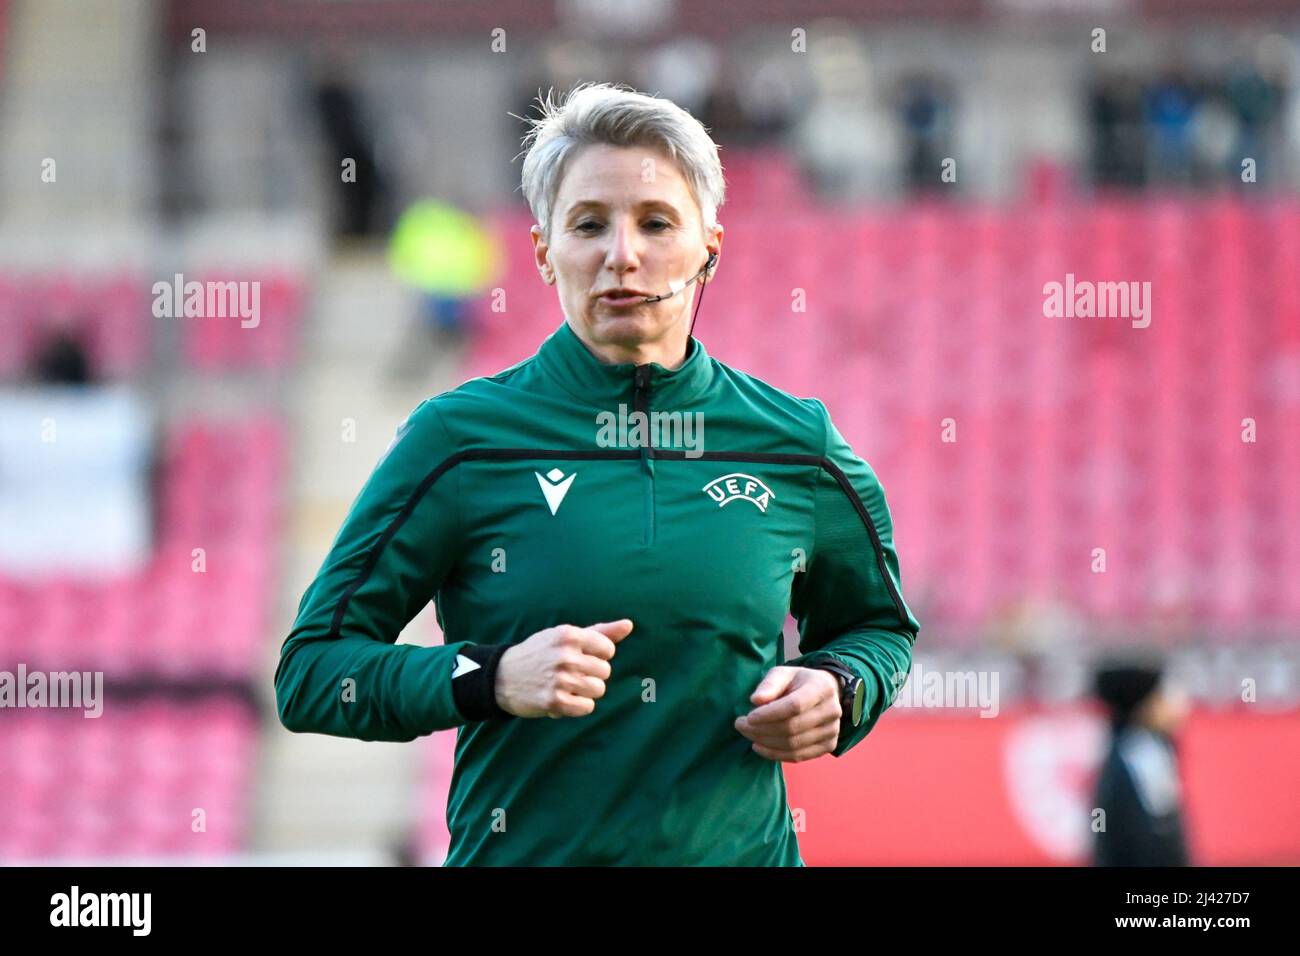 Llanelli, Wales. 8 April 2022. Match Referee Jana Adamkova during the pre-match warm-up before the FIFA Women's World Cup Qualifier Group I match between Wales Women and France Women at Parc y Scarlets in Llanelli, Wales, UK on 8 April 2022. Credit: Duncan Thomas/Majestic Media. Stock Photo